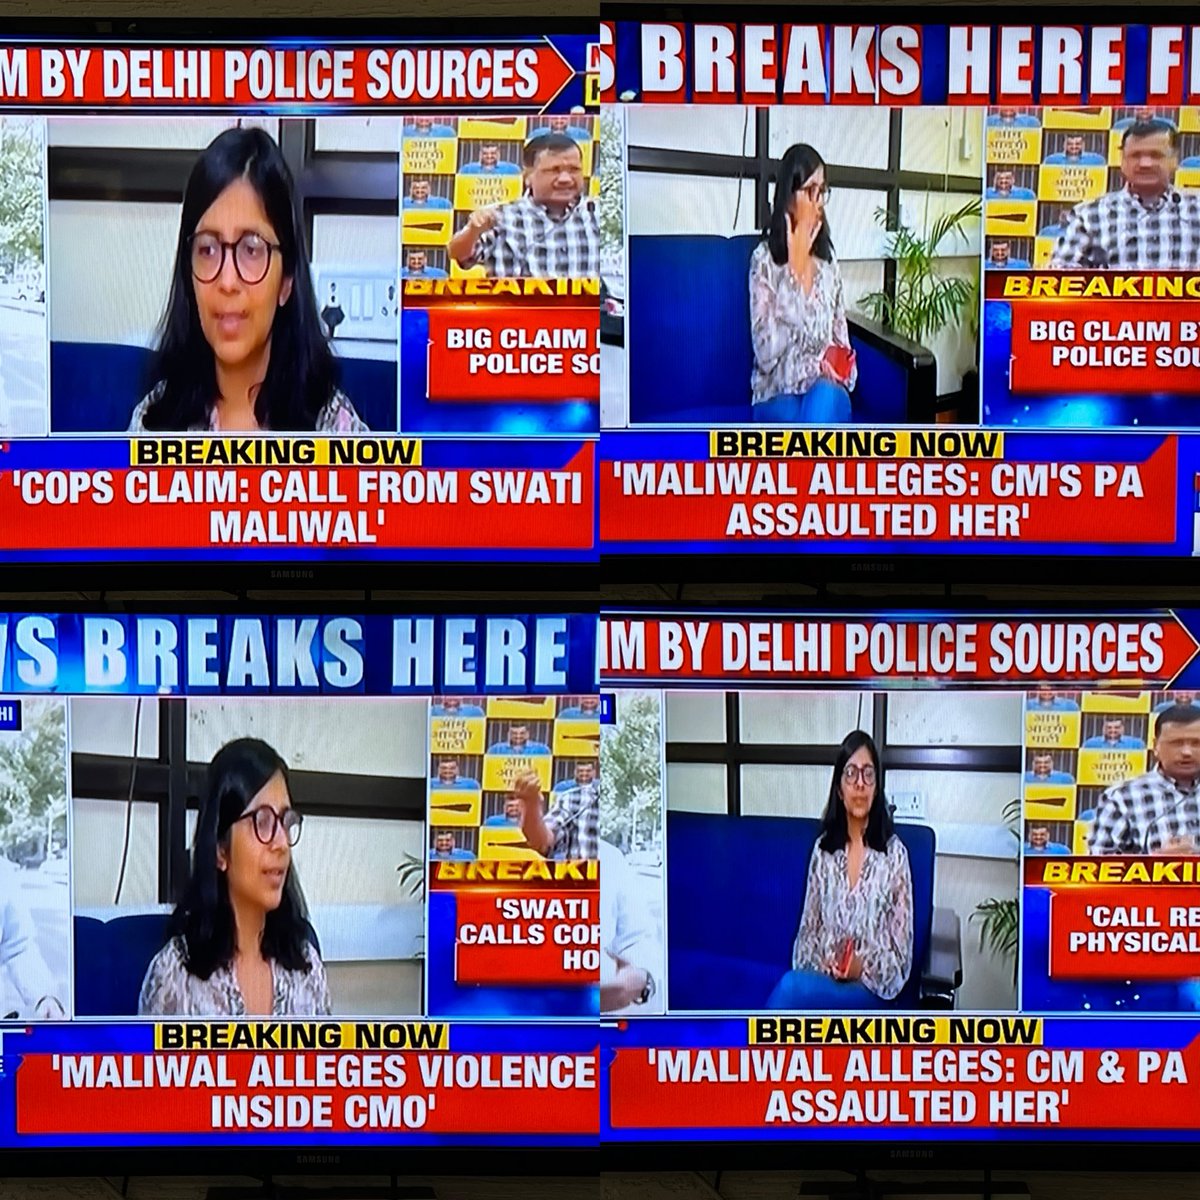 BREAKING ON @TimesNow: Swati Maliwal is claiming she was assaulted in the CMO. Fanatic calls made to the Delhi Police even.